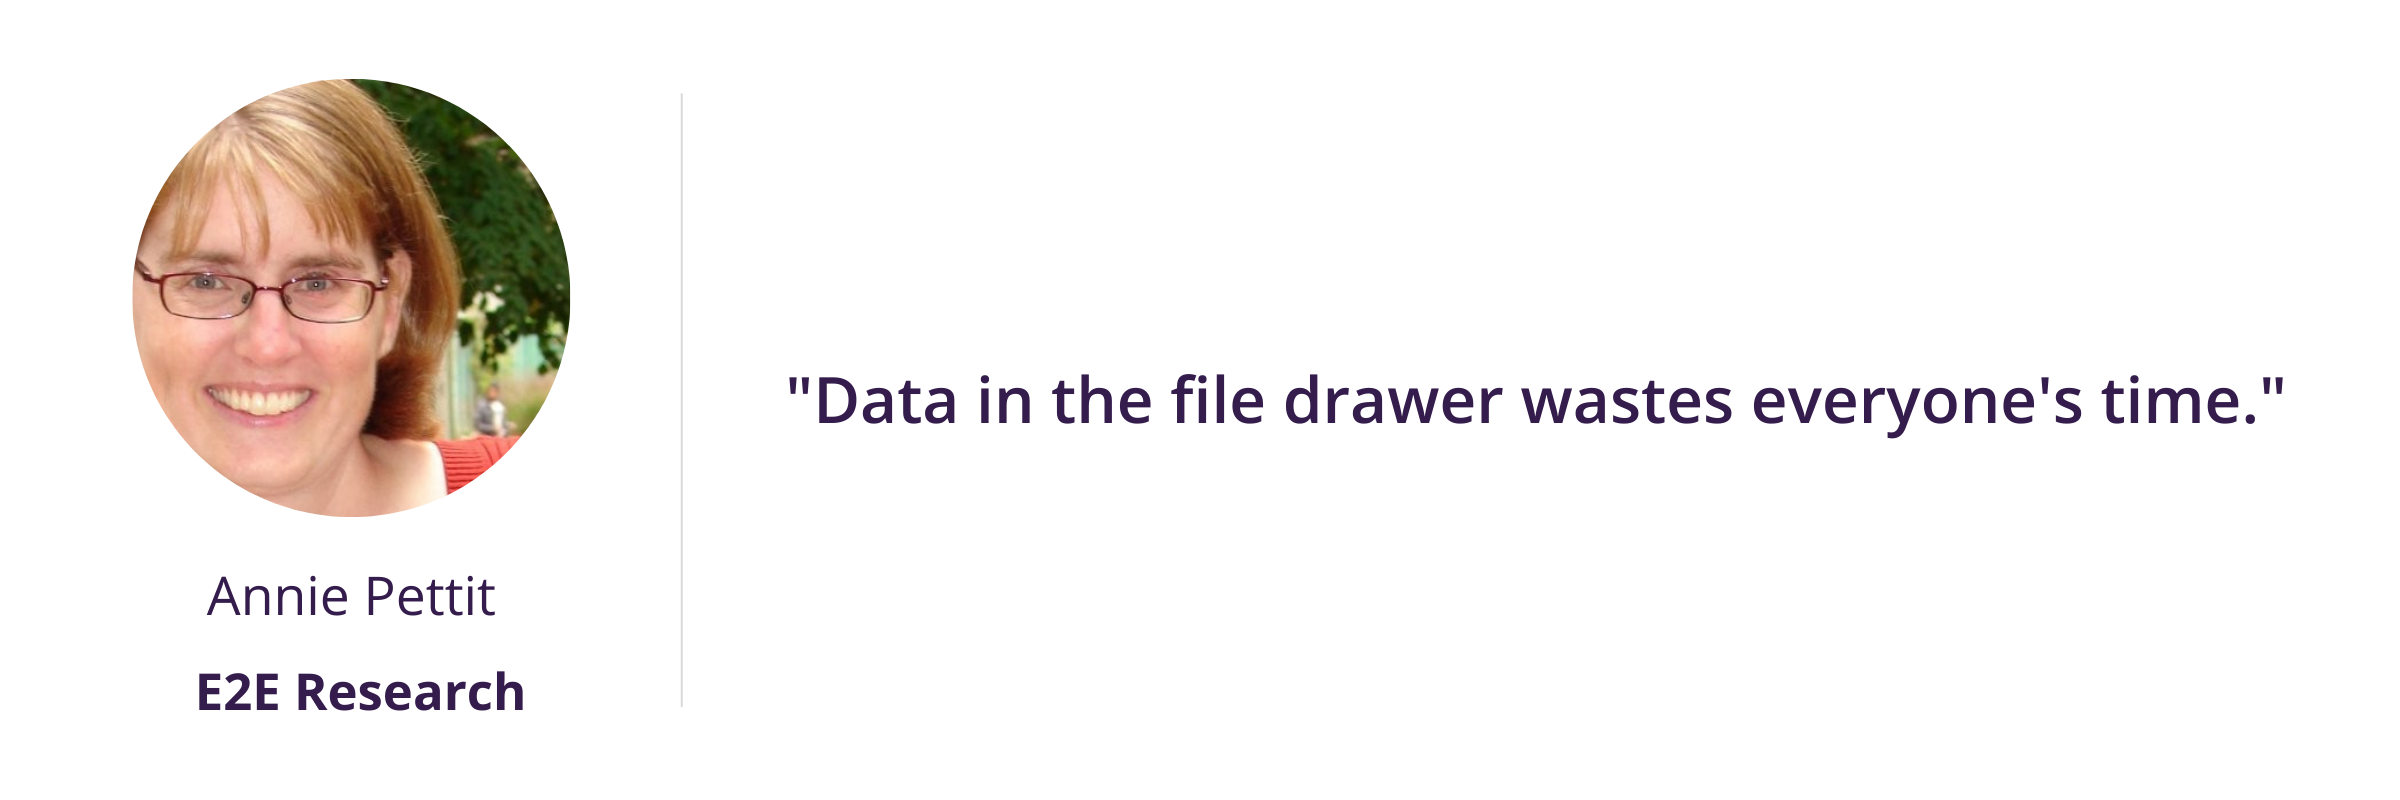 Data in the file drawer wastes everyone's time. (1)